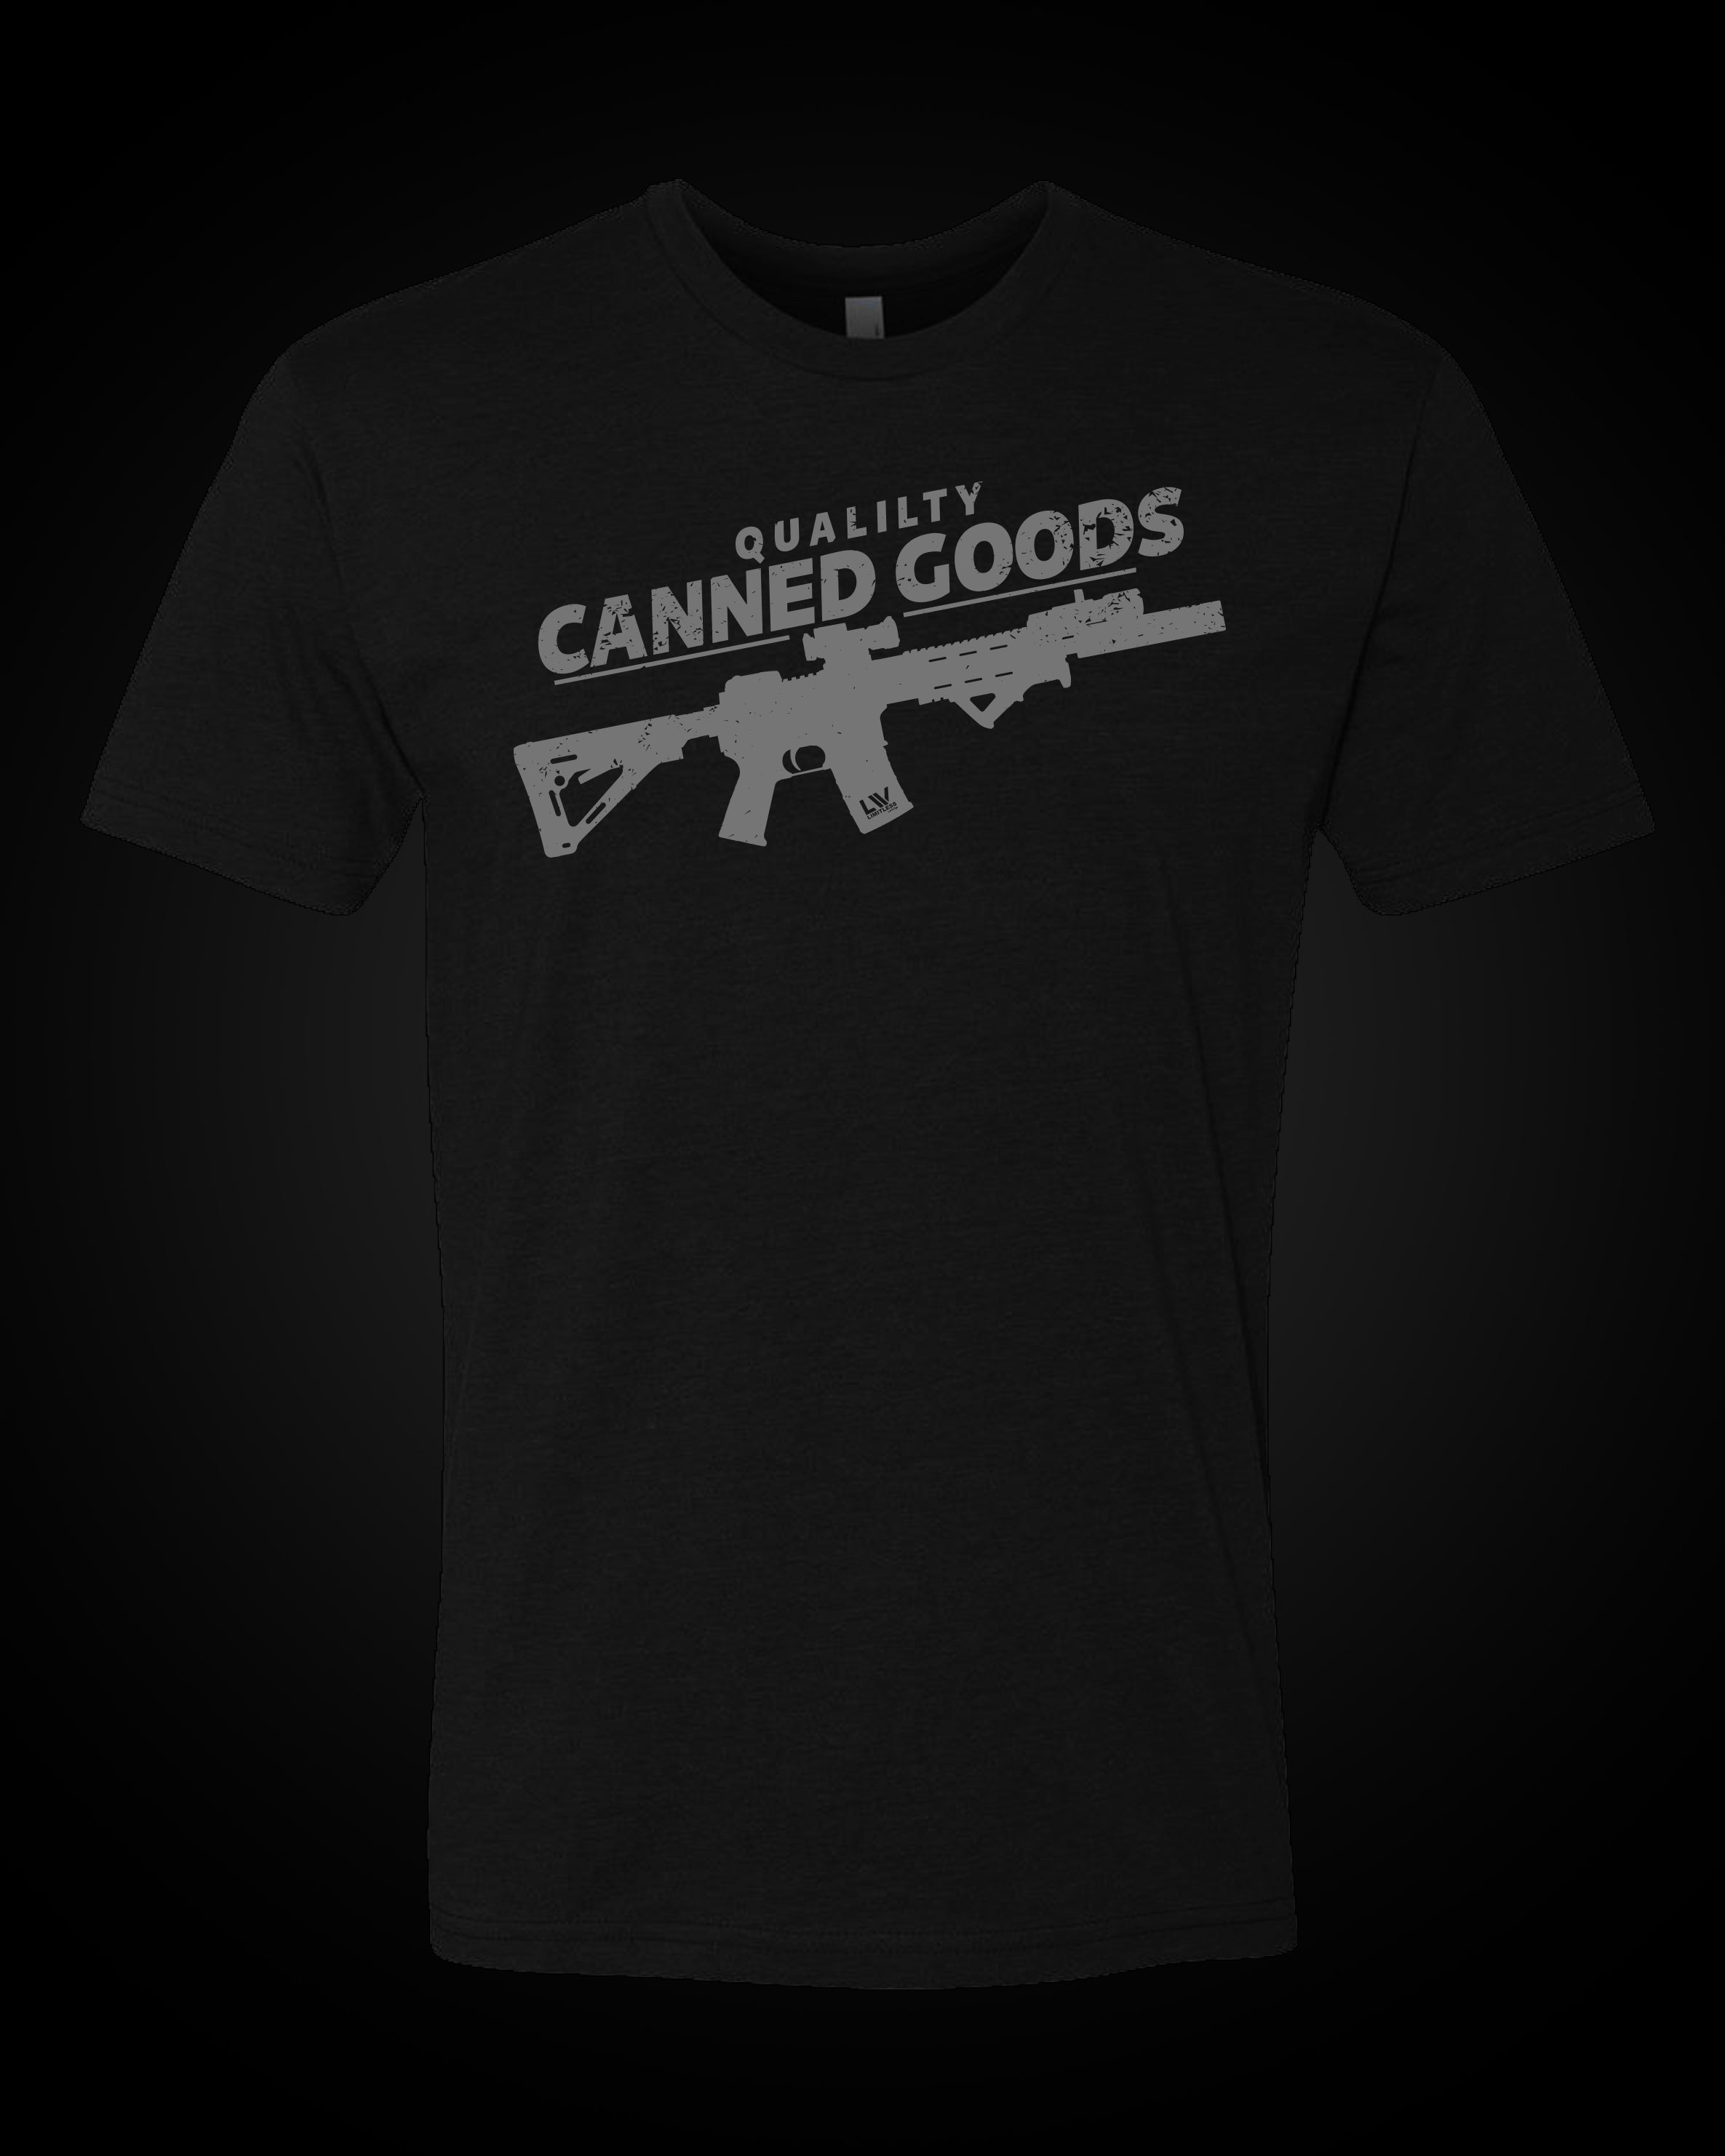 Quality Canned Goods T-Shirt